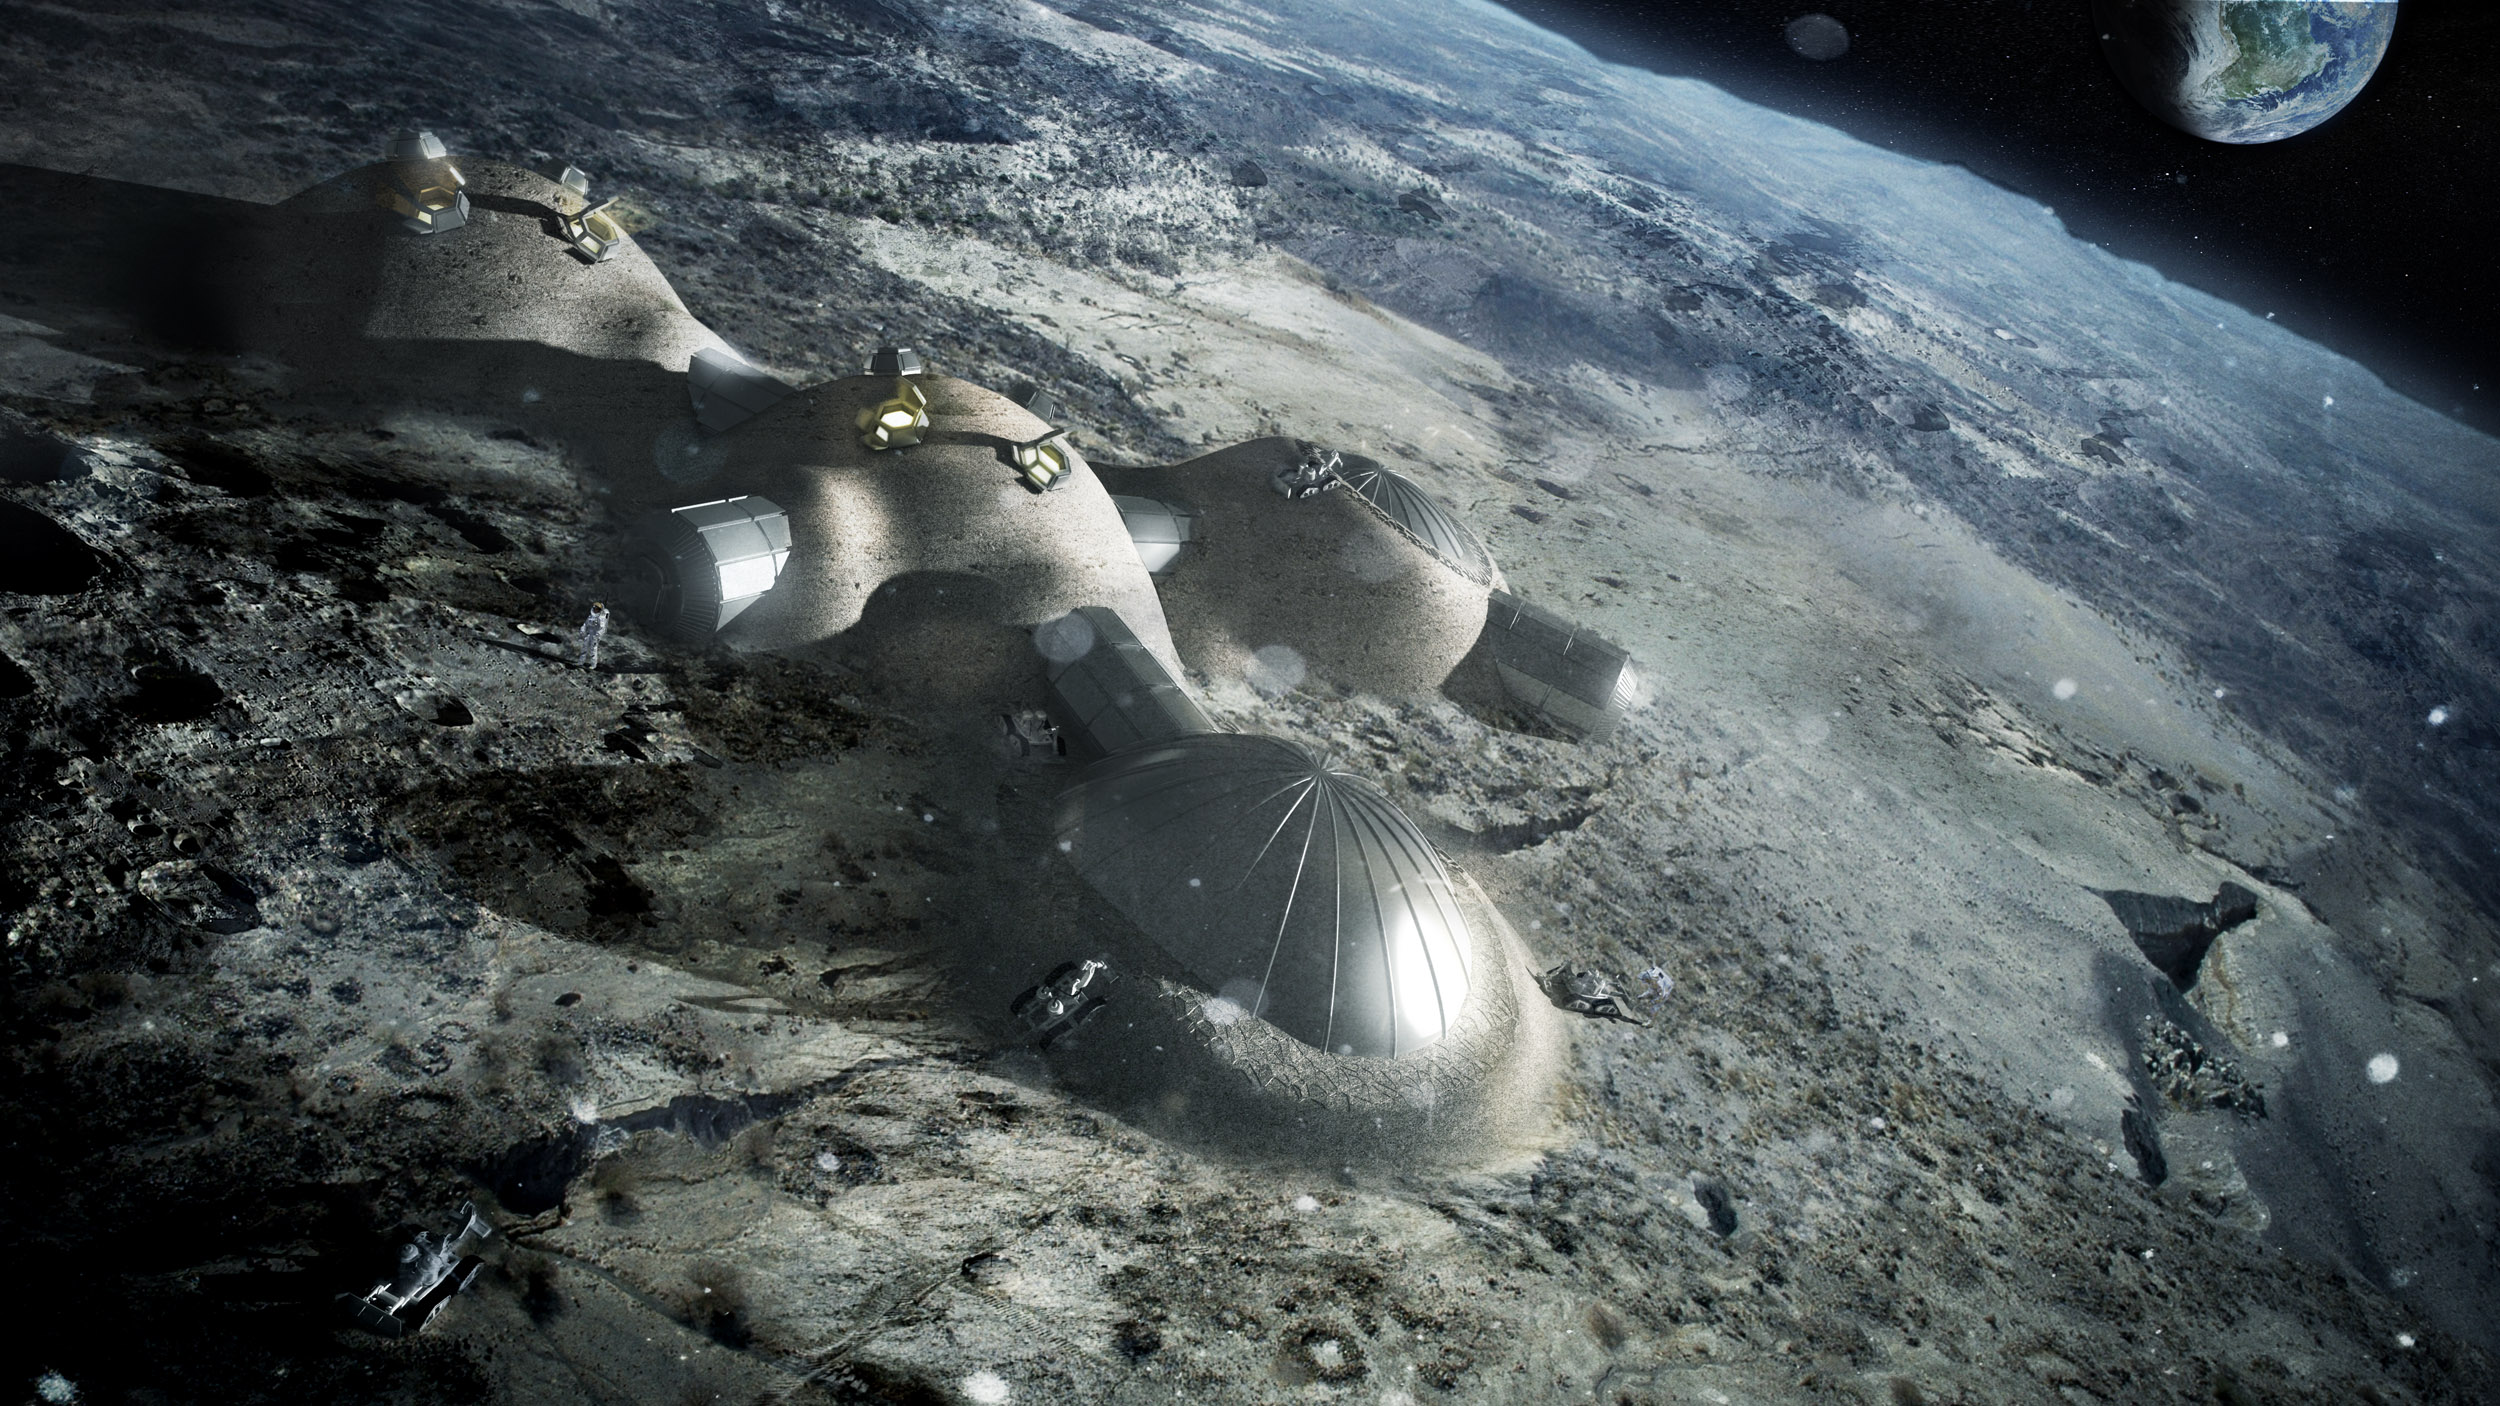 Building a Lunar Base with 3D Printing